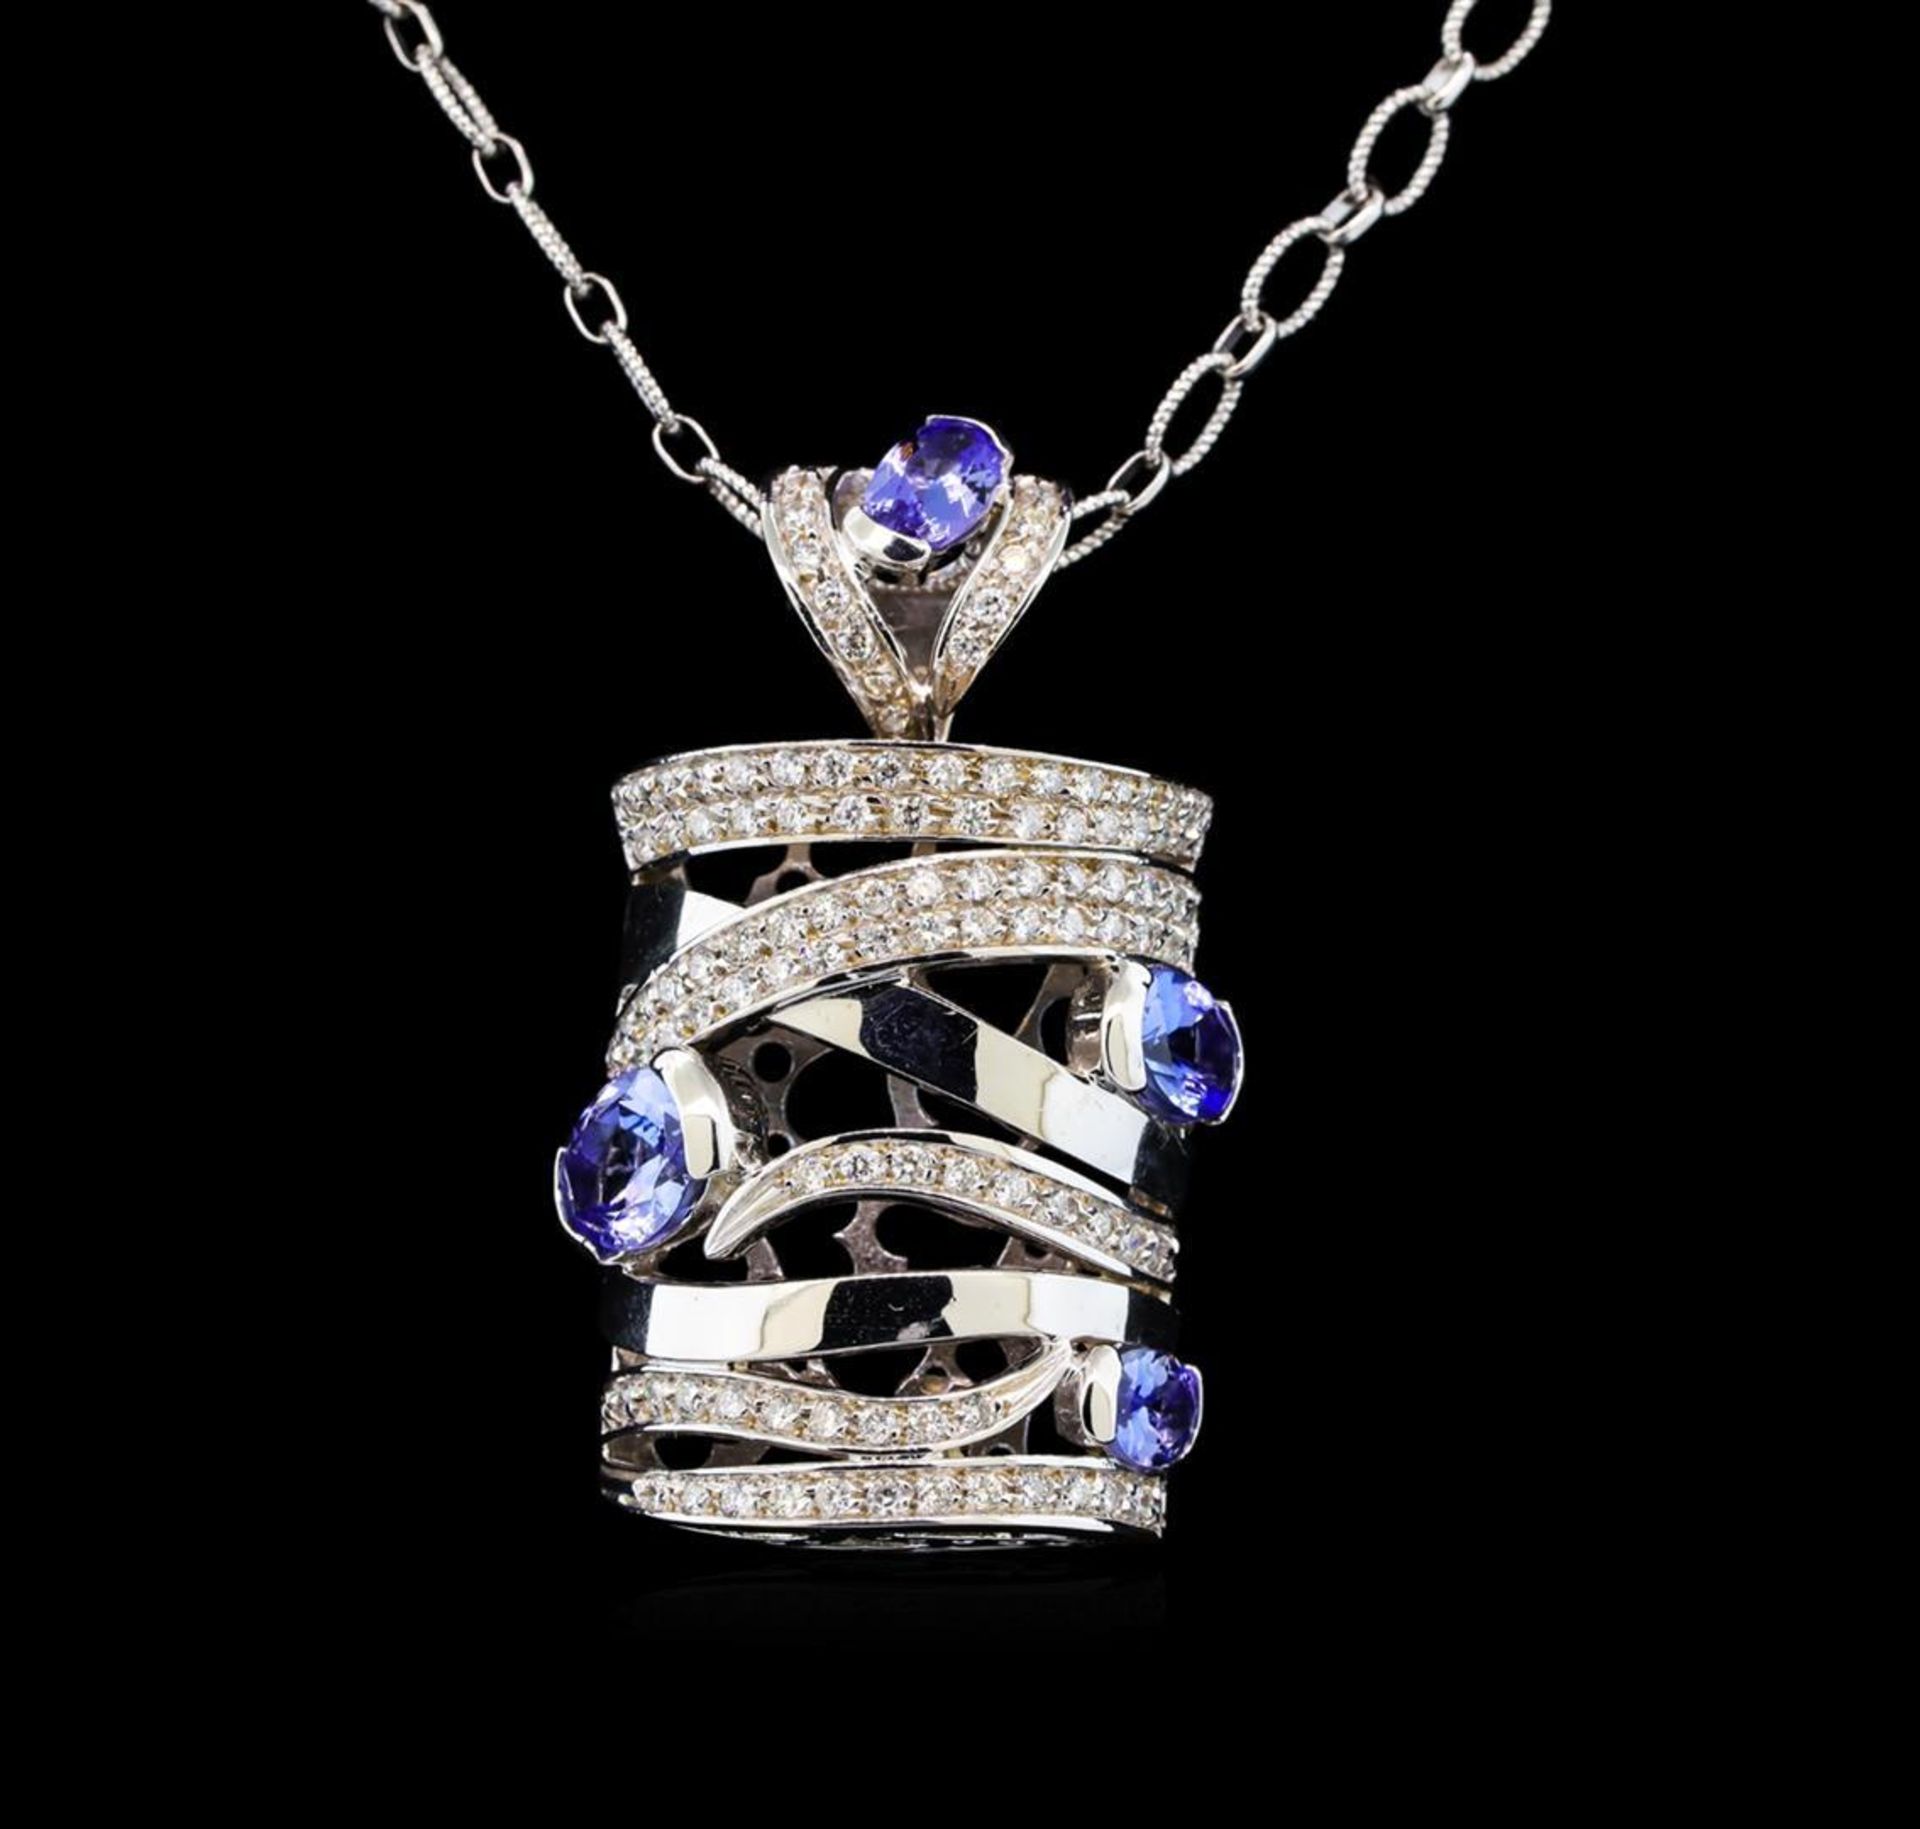 14KT White Gold 3.60 ctw Tanzanite and Diamond Pendant With Chain - Image 2 of 3